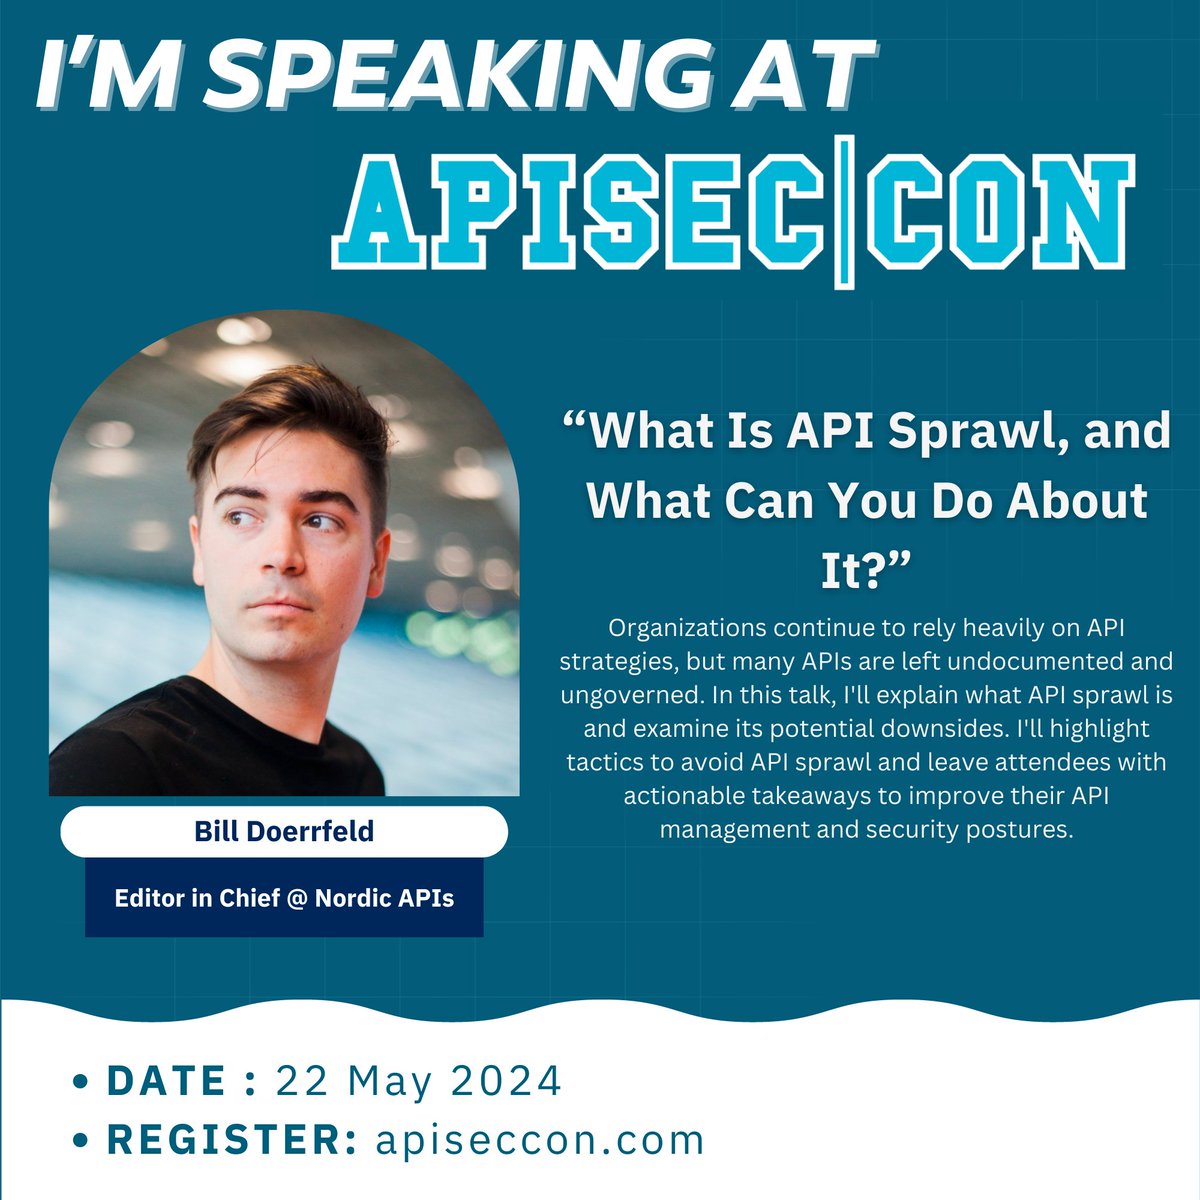 🚨 APISEC CON Speaker Alert 🚨 Bill Doerrfeld from Nordic APIs is speaking at APISEC CON in May! Curious about API Sprawl? Bill has you covered. Register: conf.apisecuniversity.com